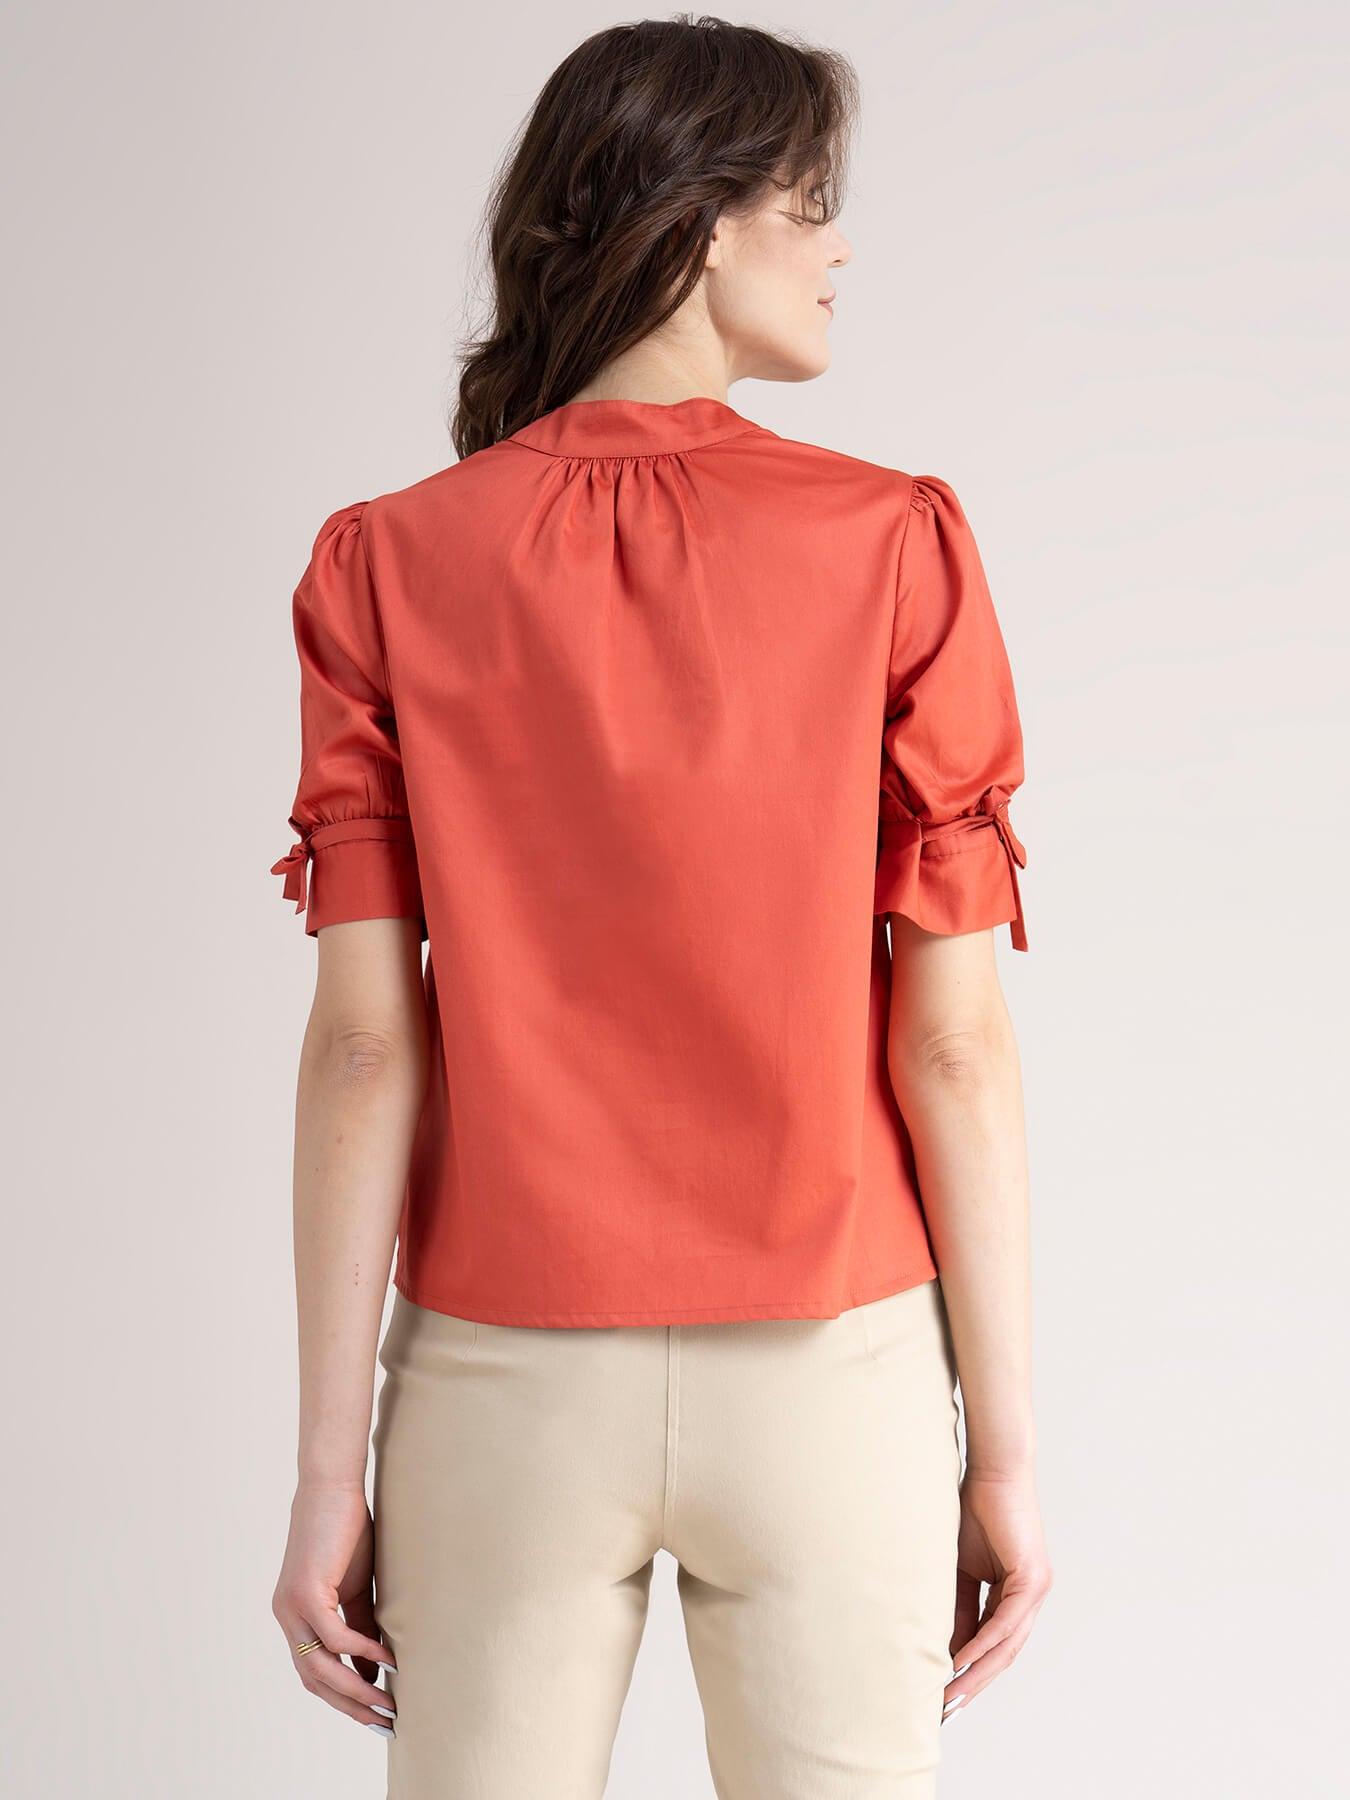 Cotton Tie-Up Sleeve Top - Coral Red| Formal Tops